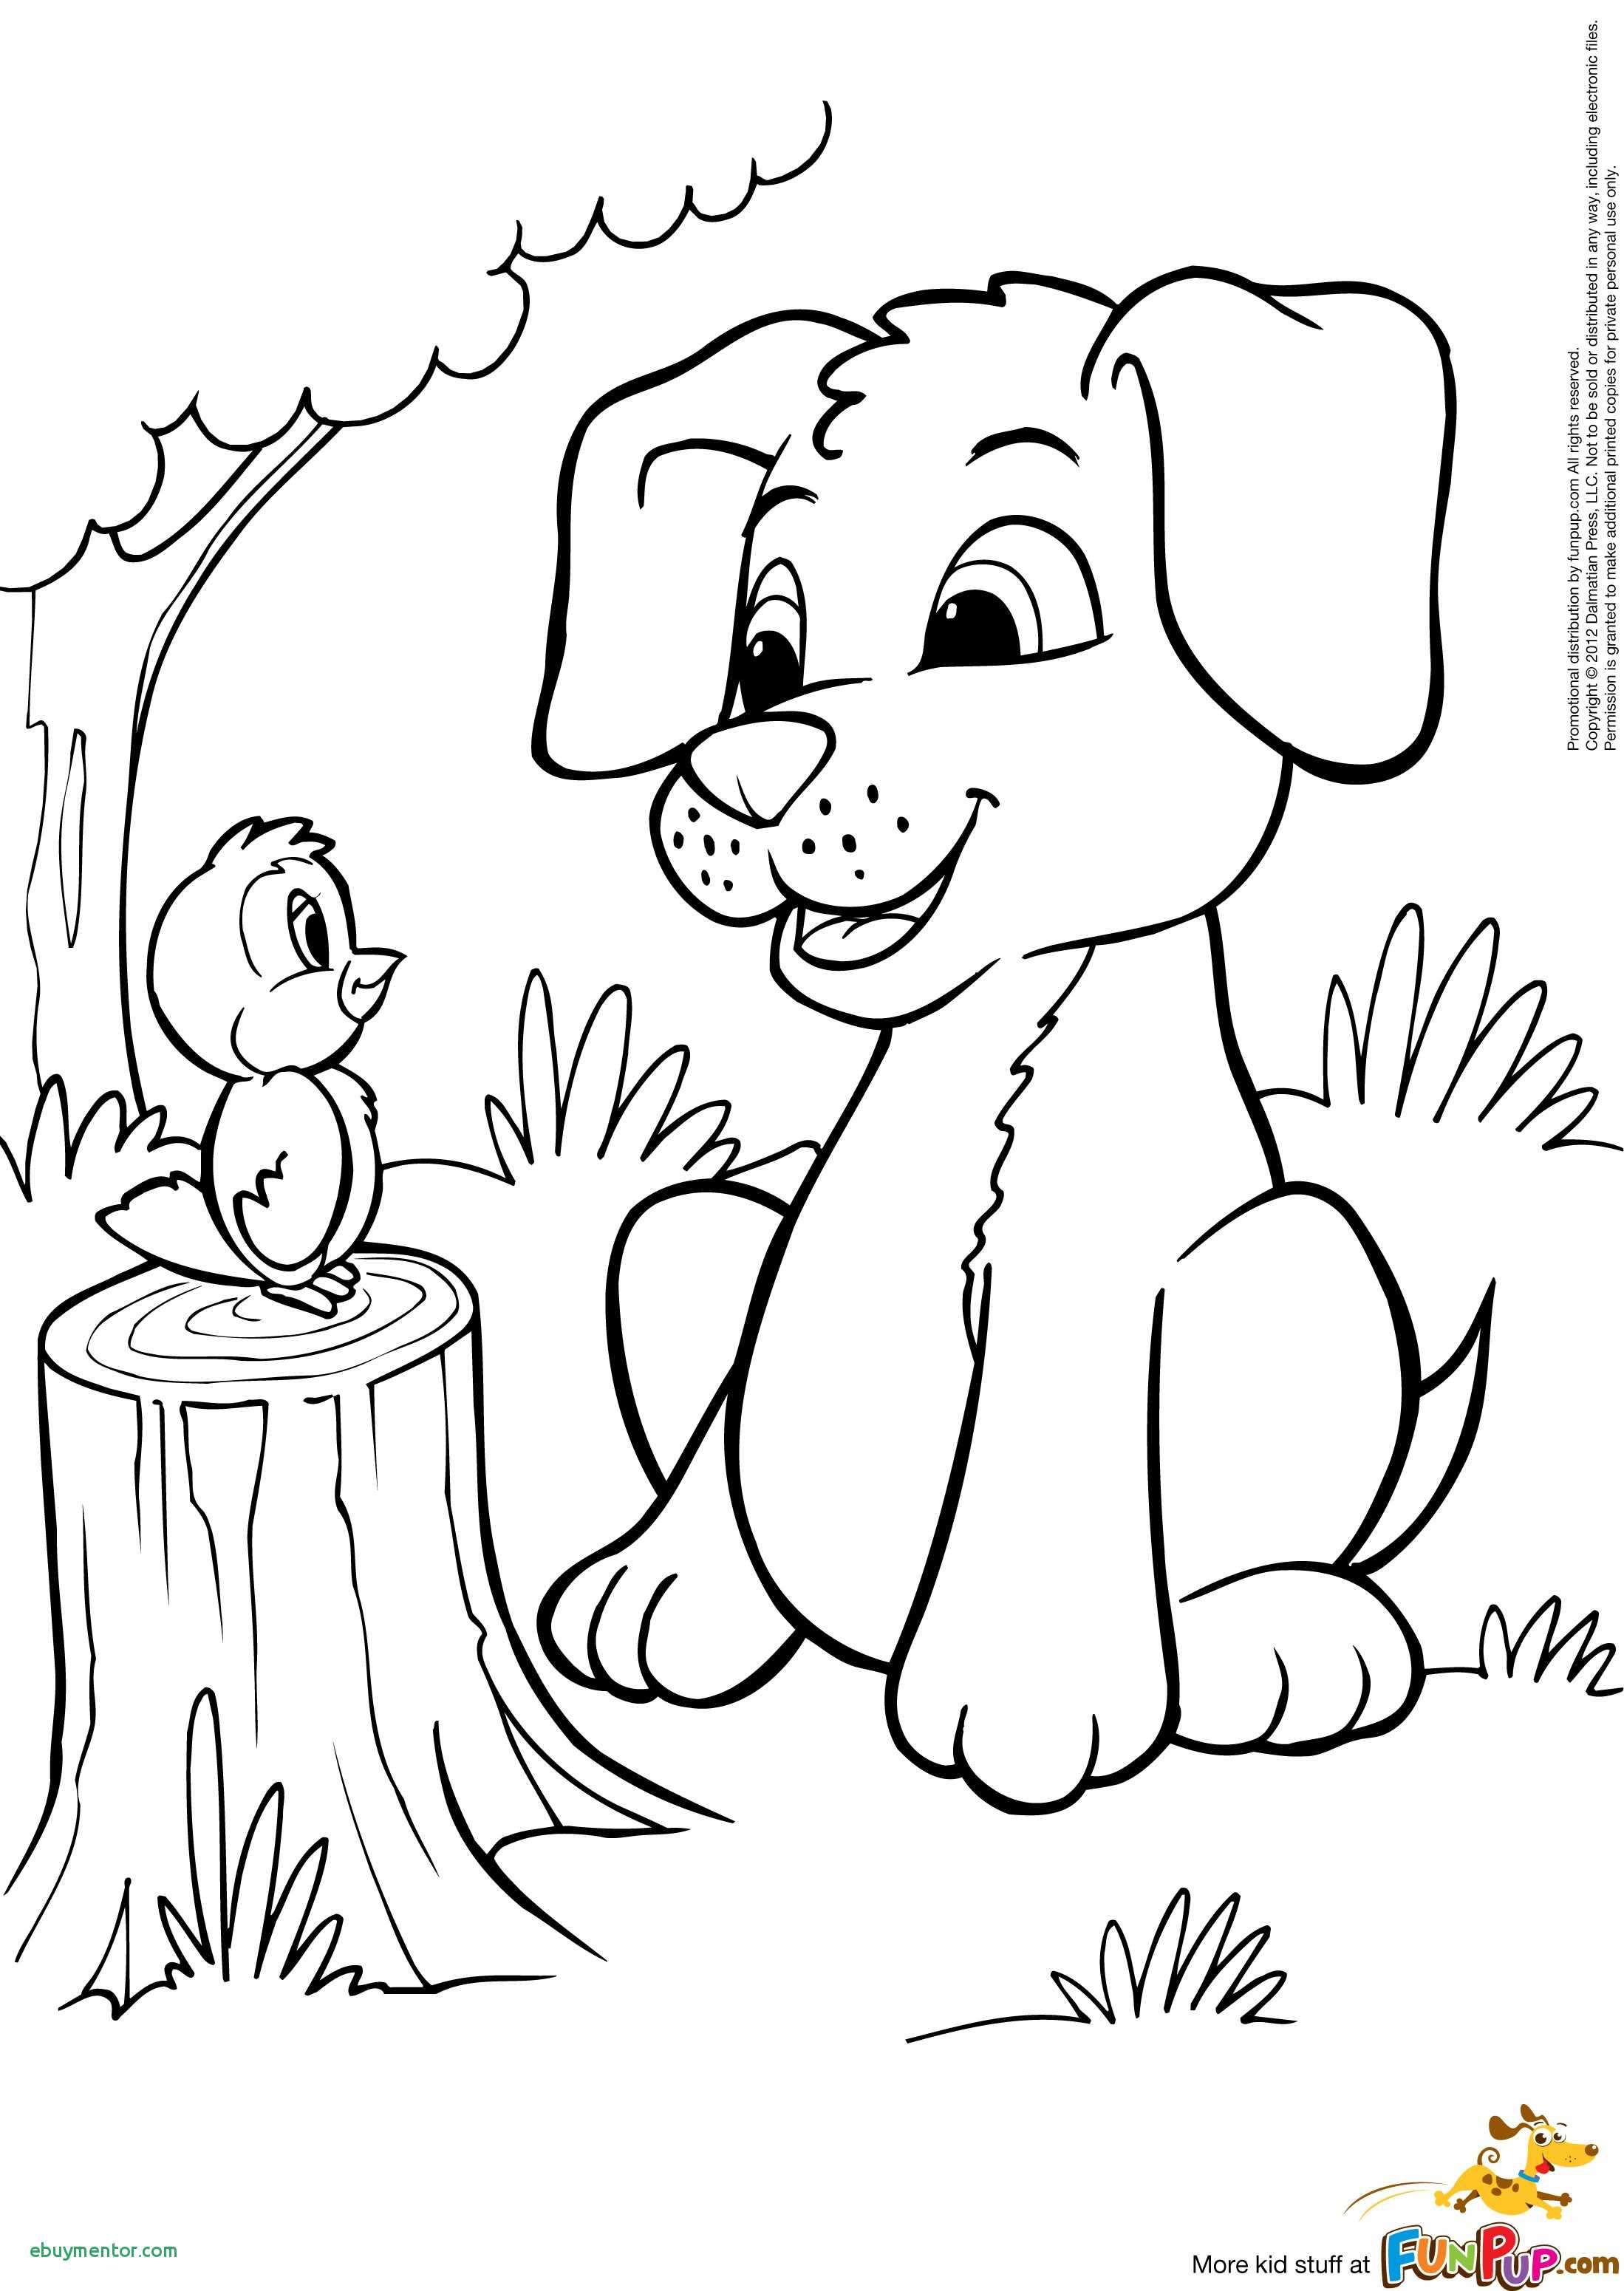 Pictures Of Puppies and Kittens to Color Wallpaper